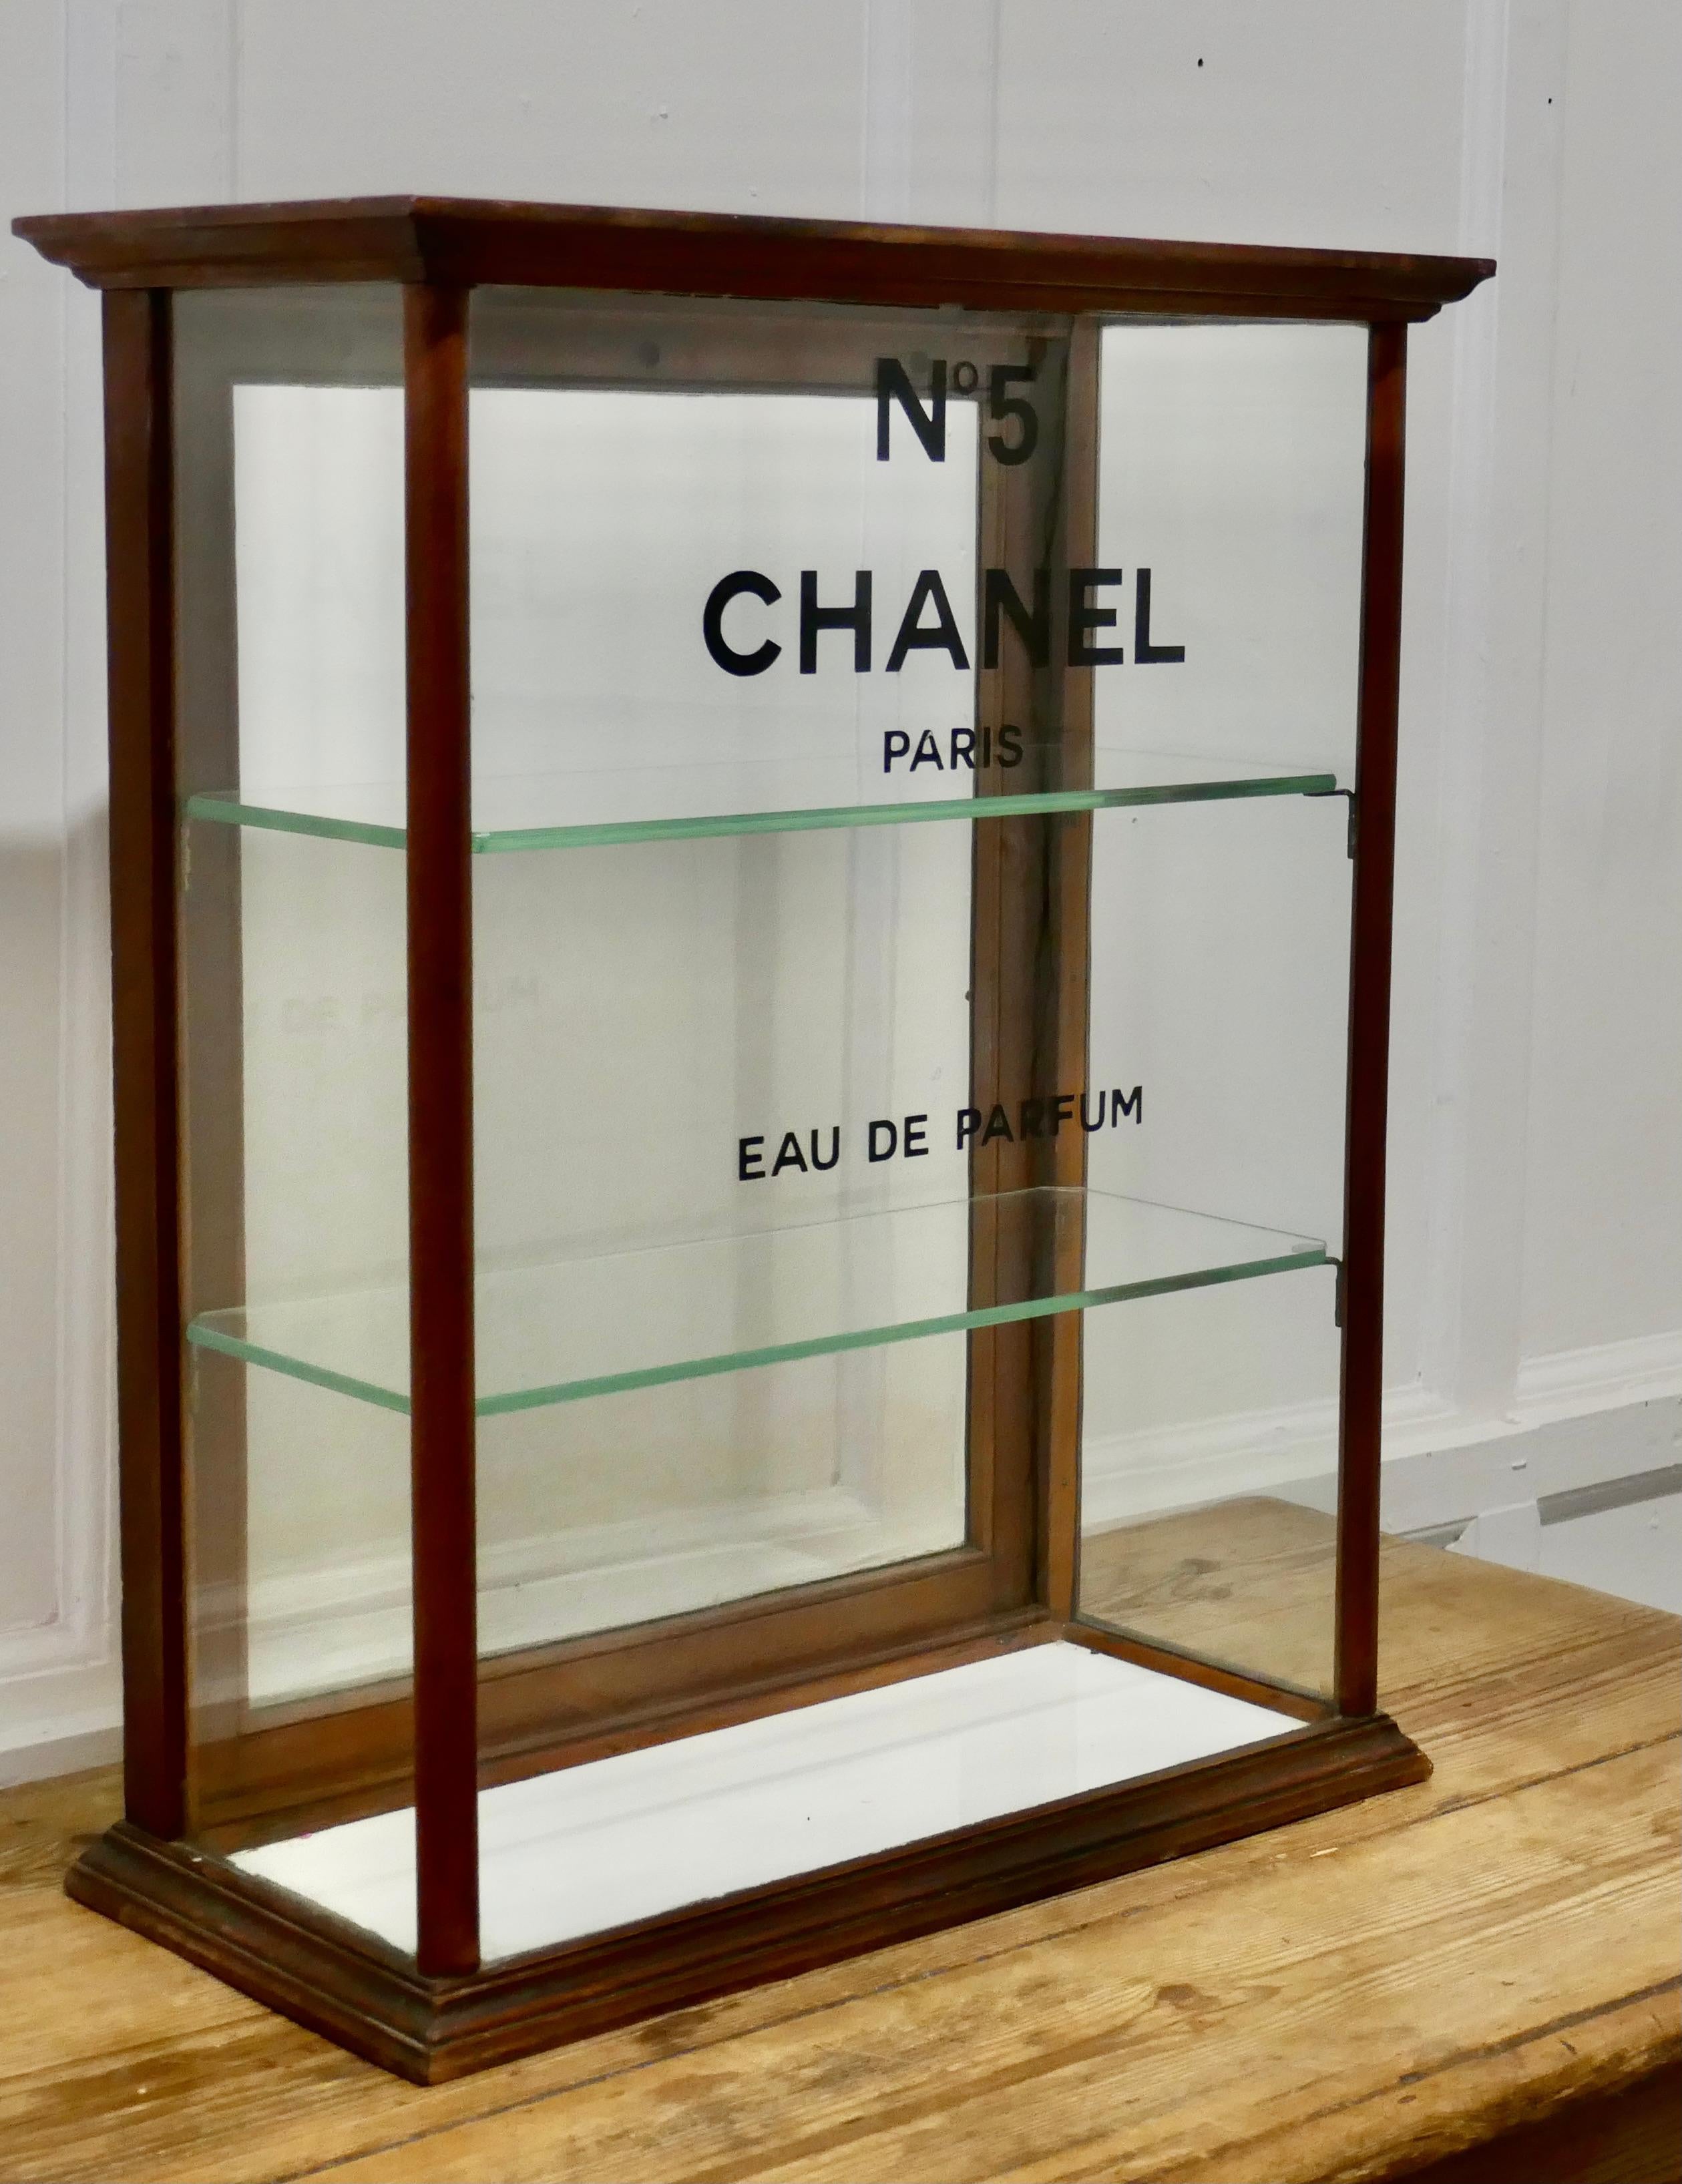 Chemist shop perfume display cabinet, Chanel No 5

This glazed shop display cabinet is made mahogany, the glass has painted lettering on the front advertising Chanel No 5

The cabinet has a rear door and 2 glass shelves
This is a very